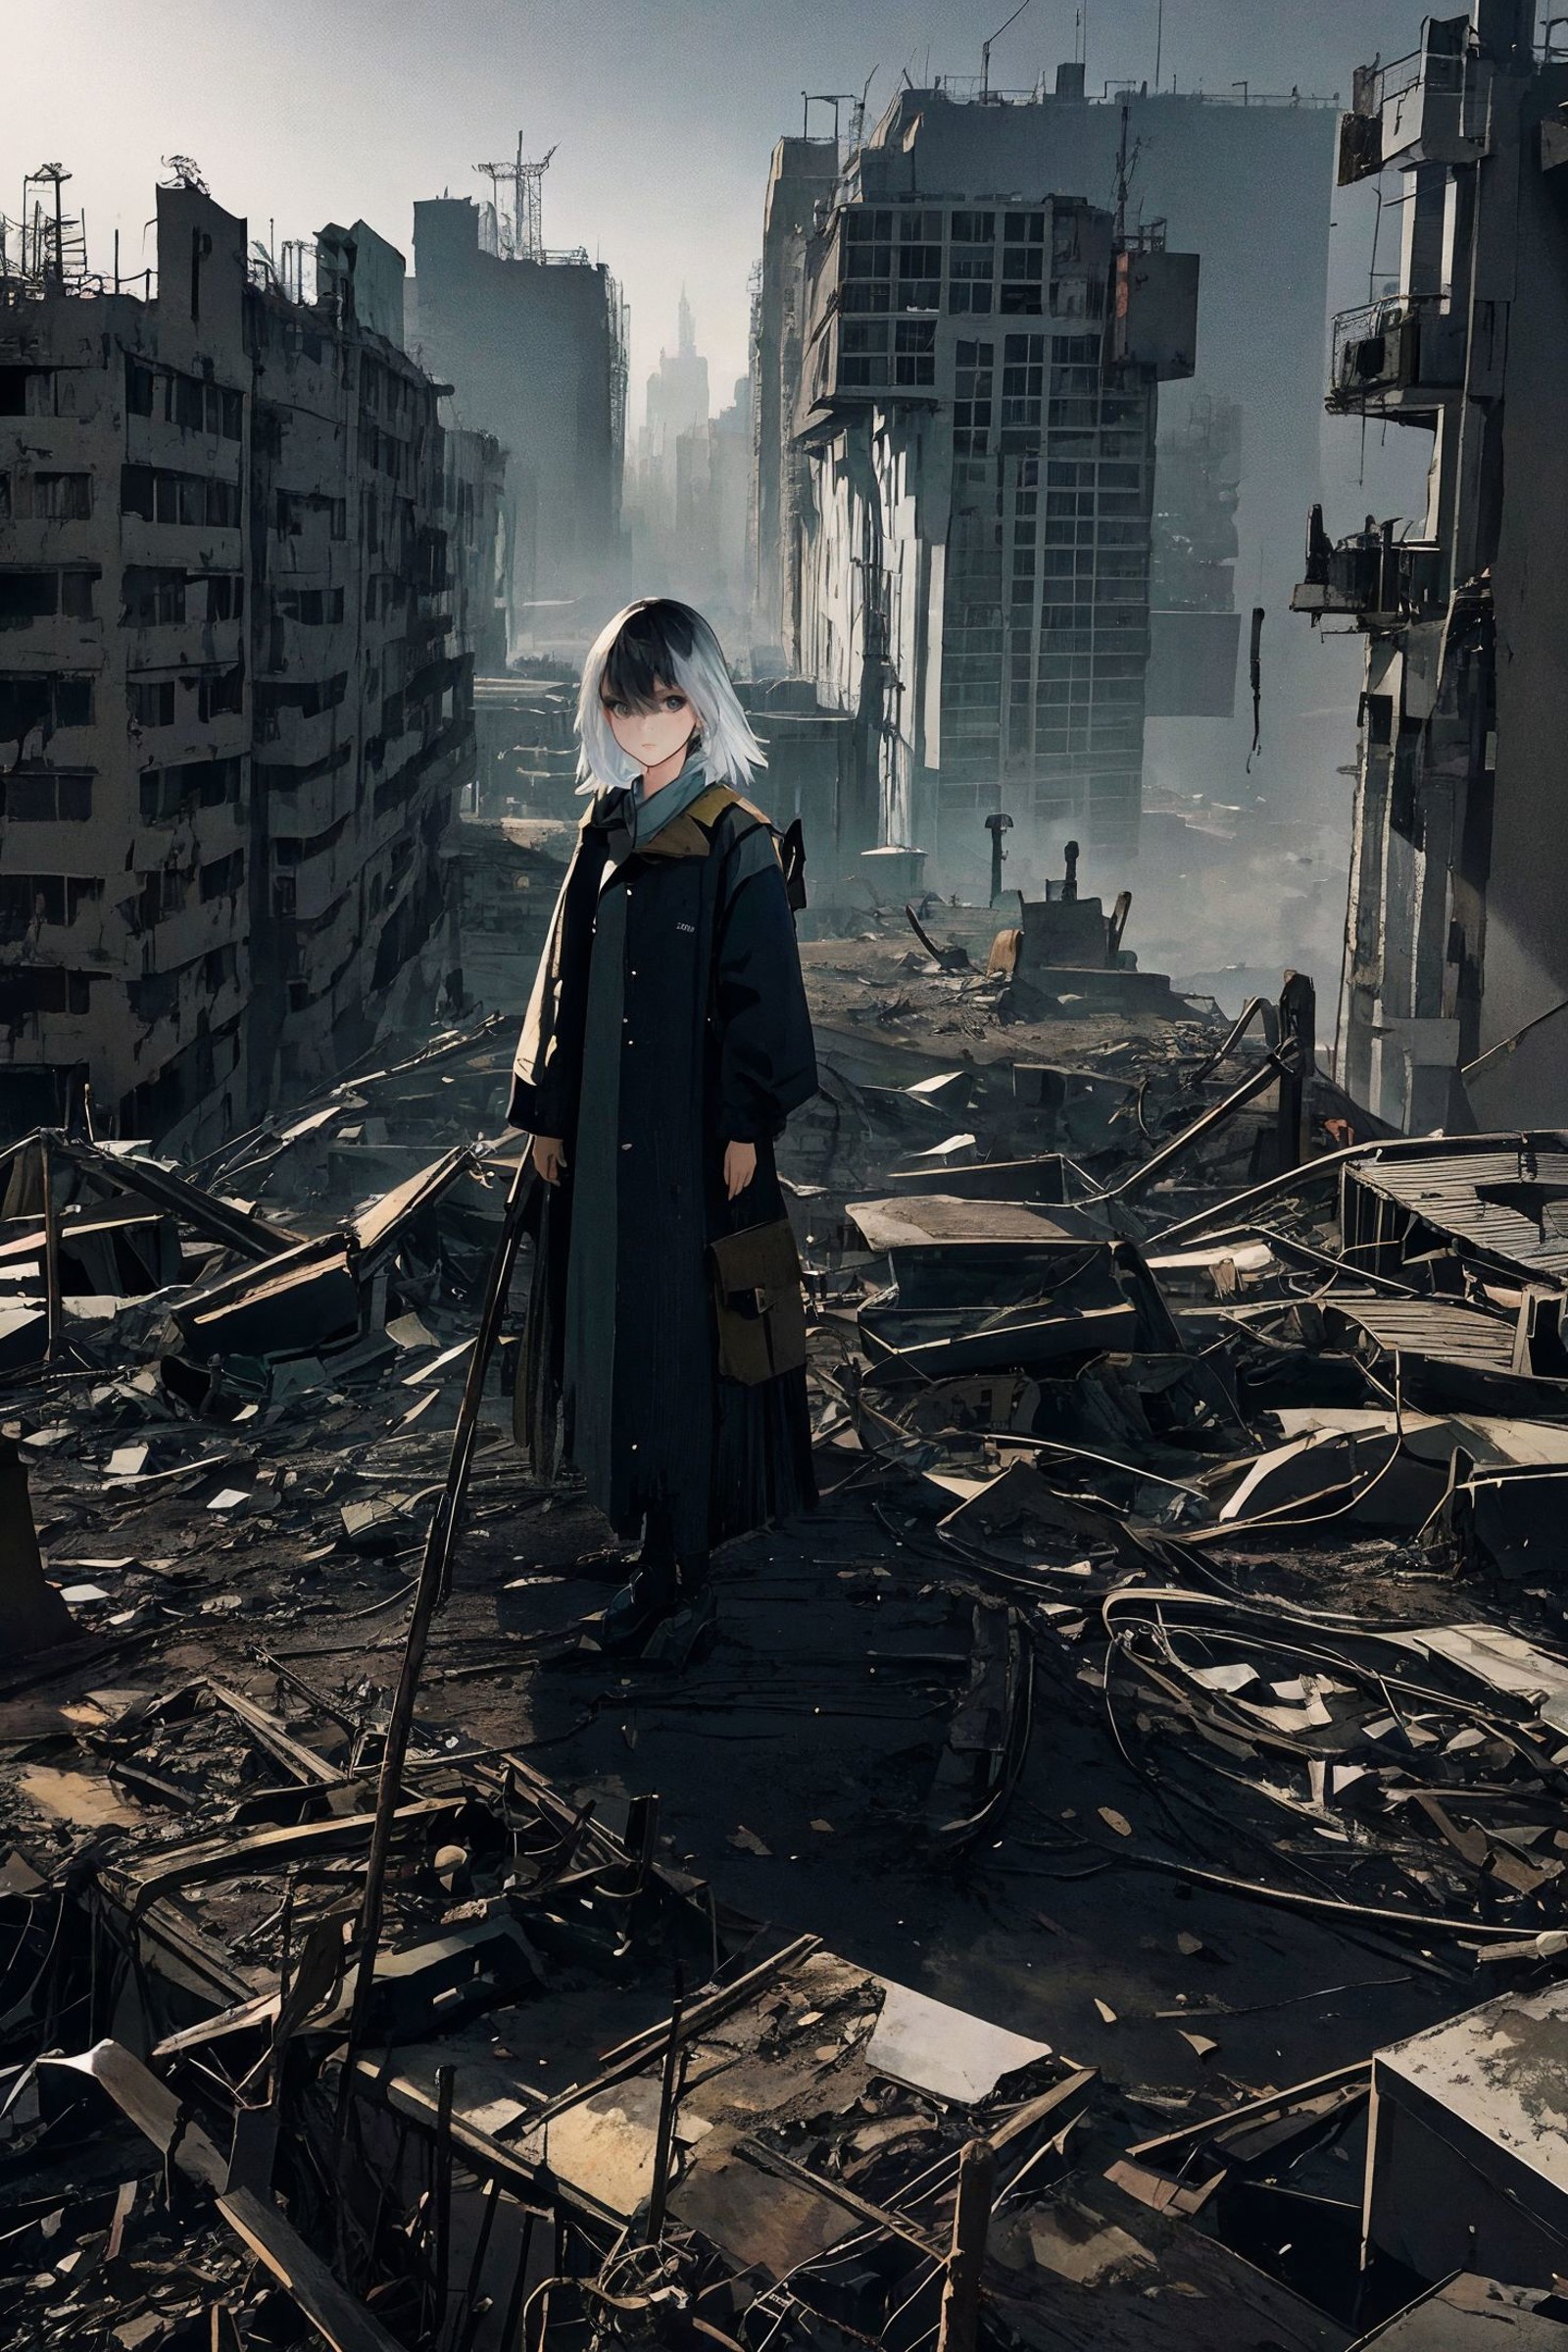 The outline of a woman,through the outline the viewer can see a sprawling post-apocalyptic city,smoky,double exposure,